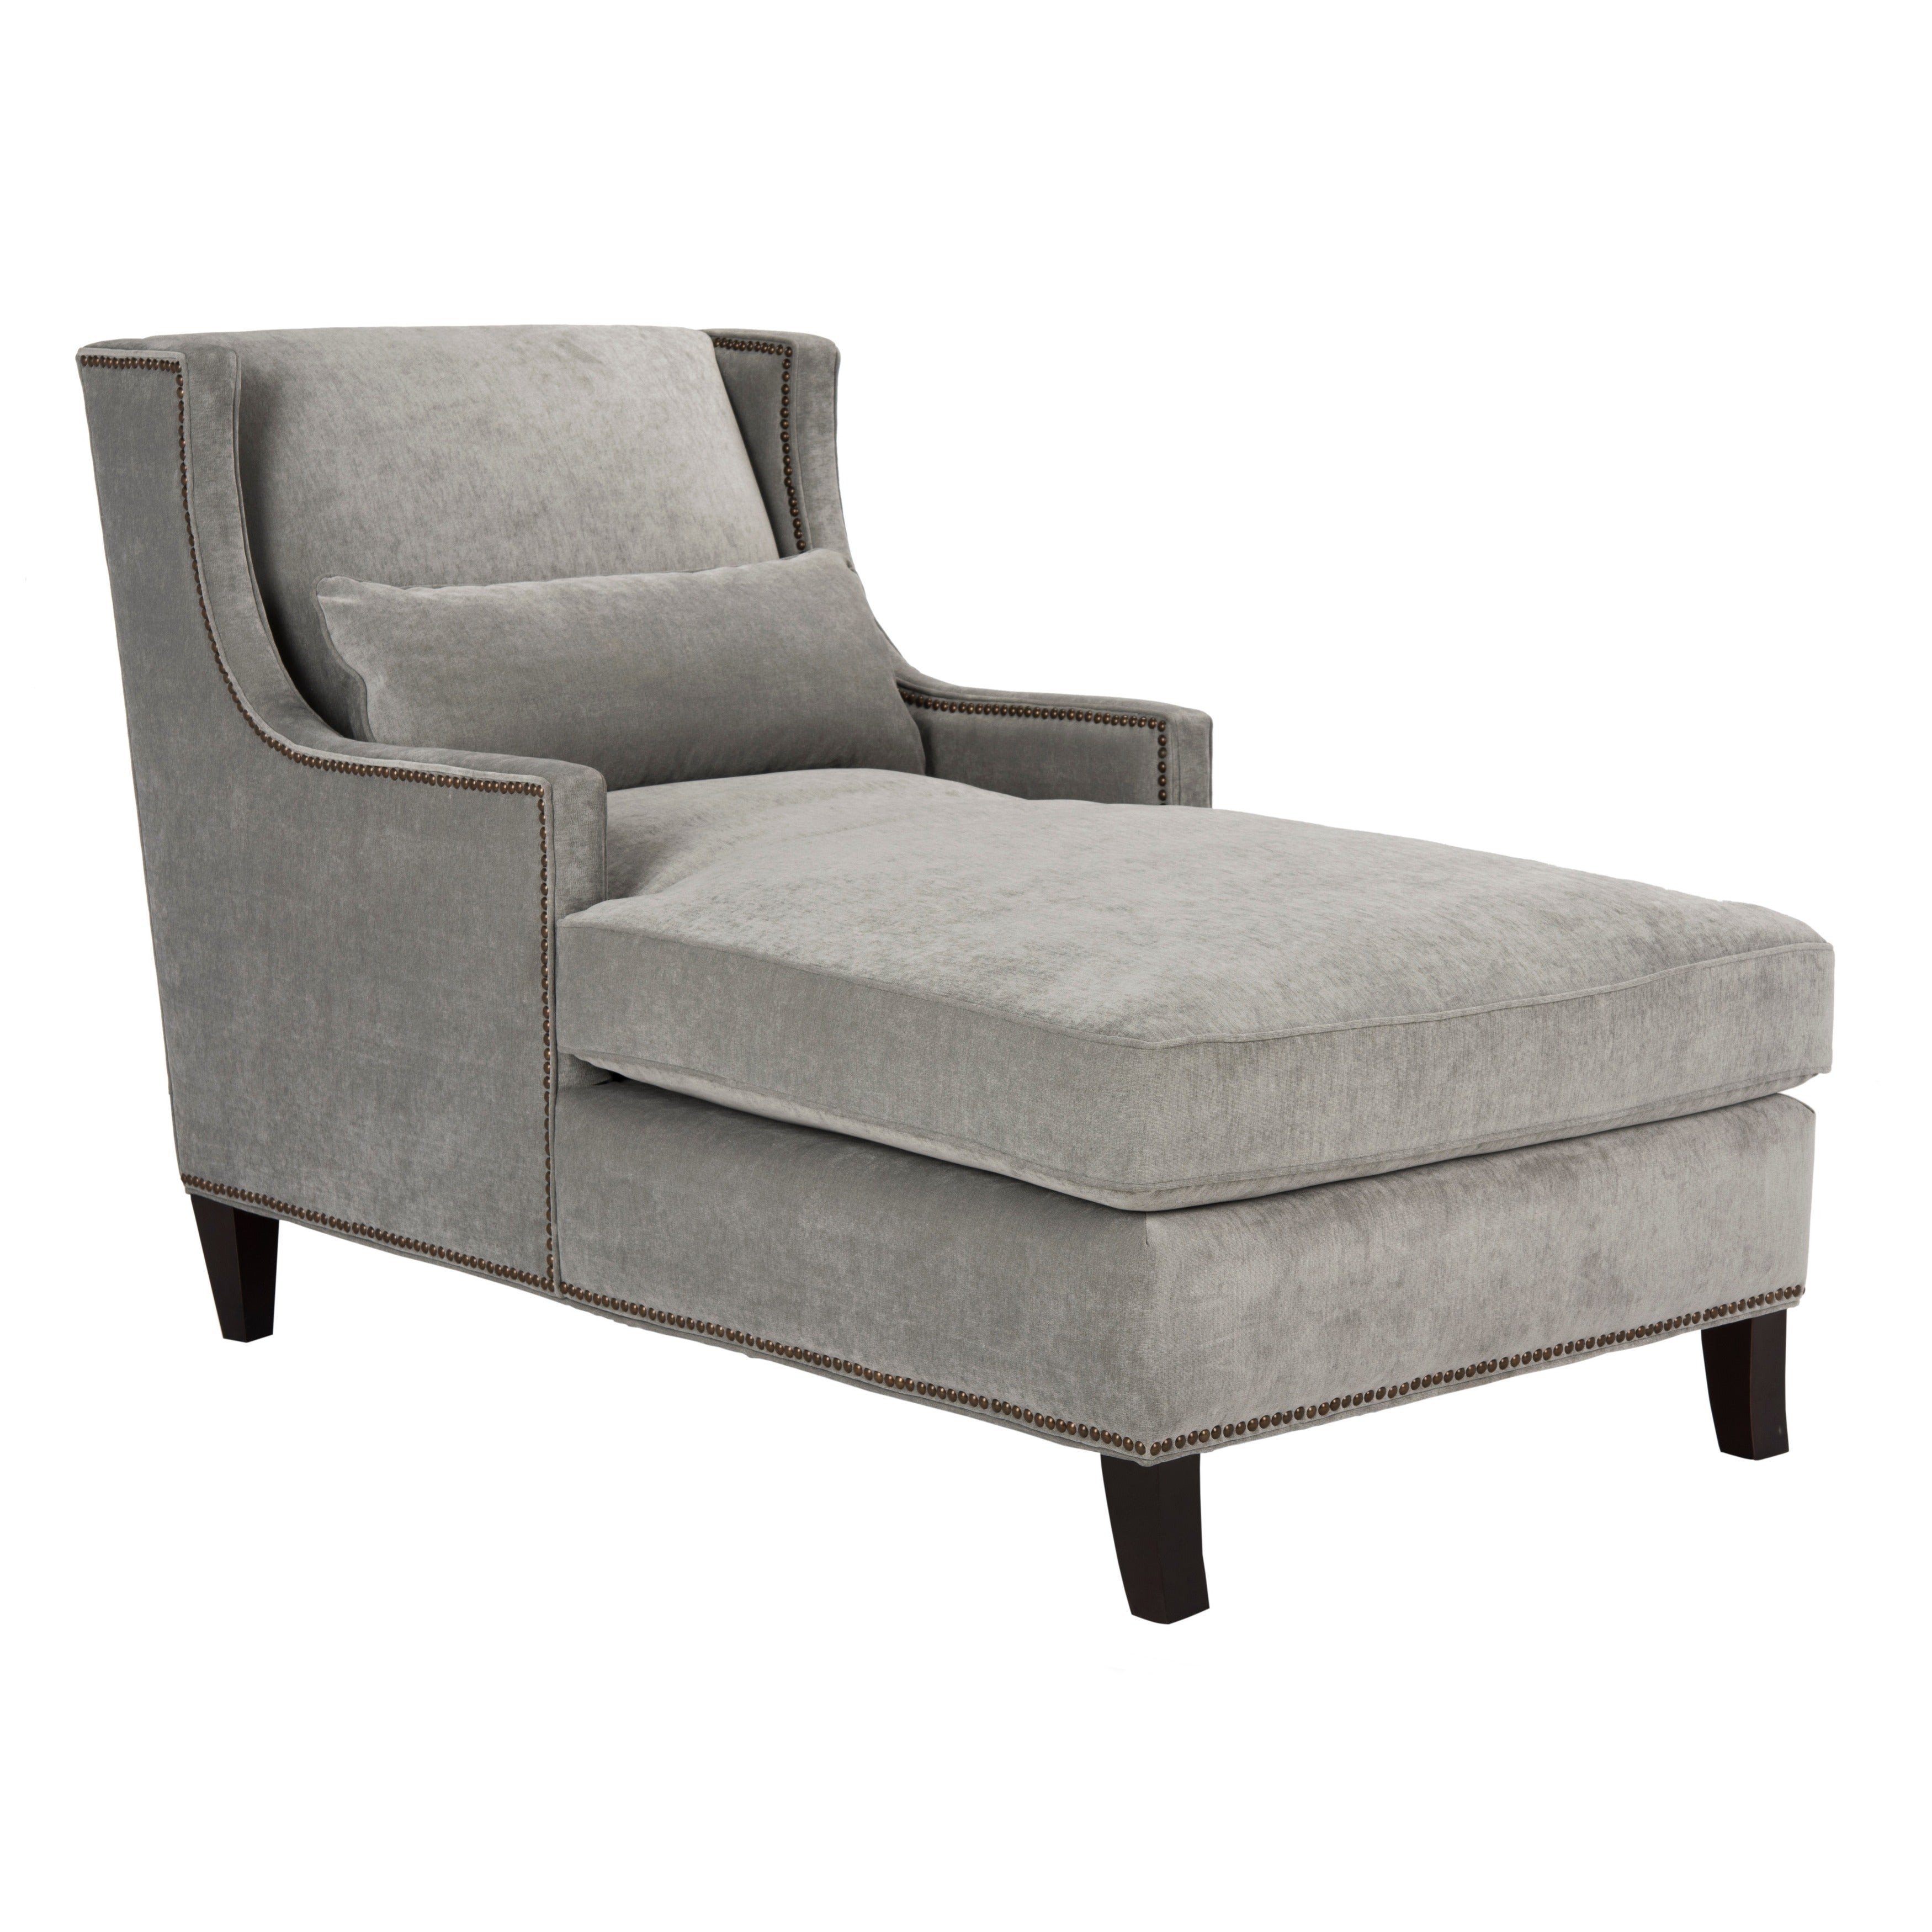 Comfy Lounge Chairs for Bedroom Unique Safavieh Couture High Line Collection Vitali Grey Velvet Chaise Lounge Chair